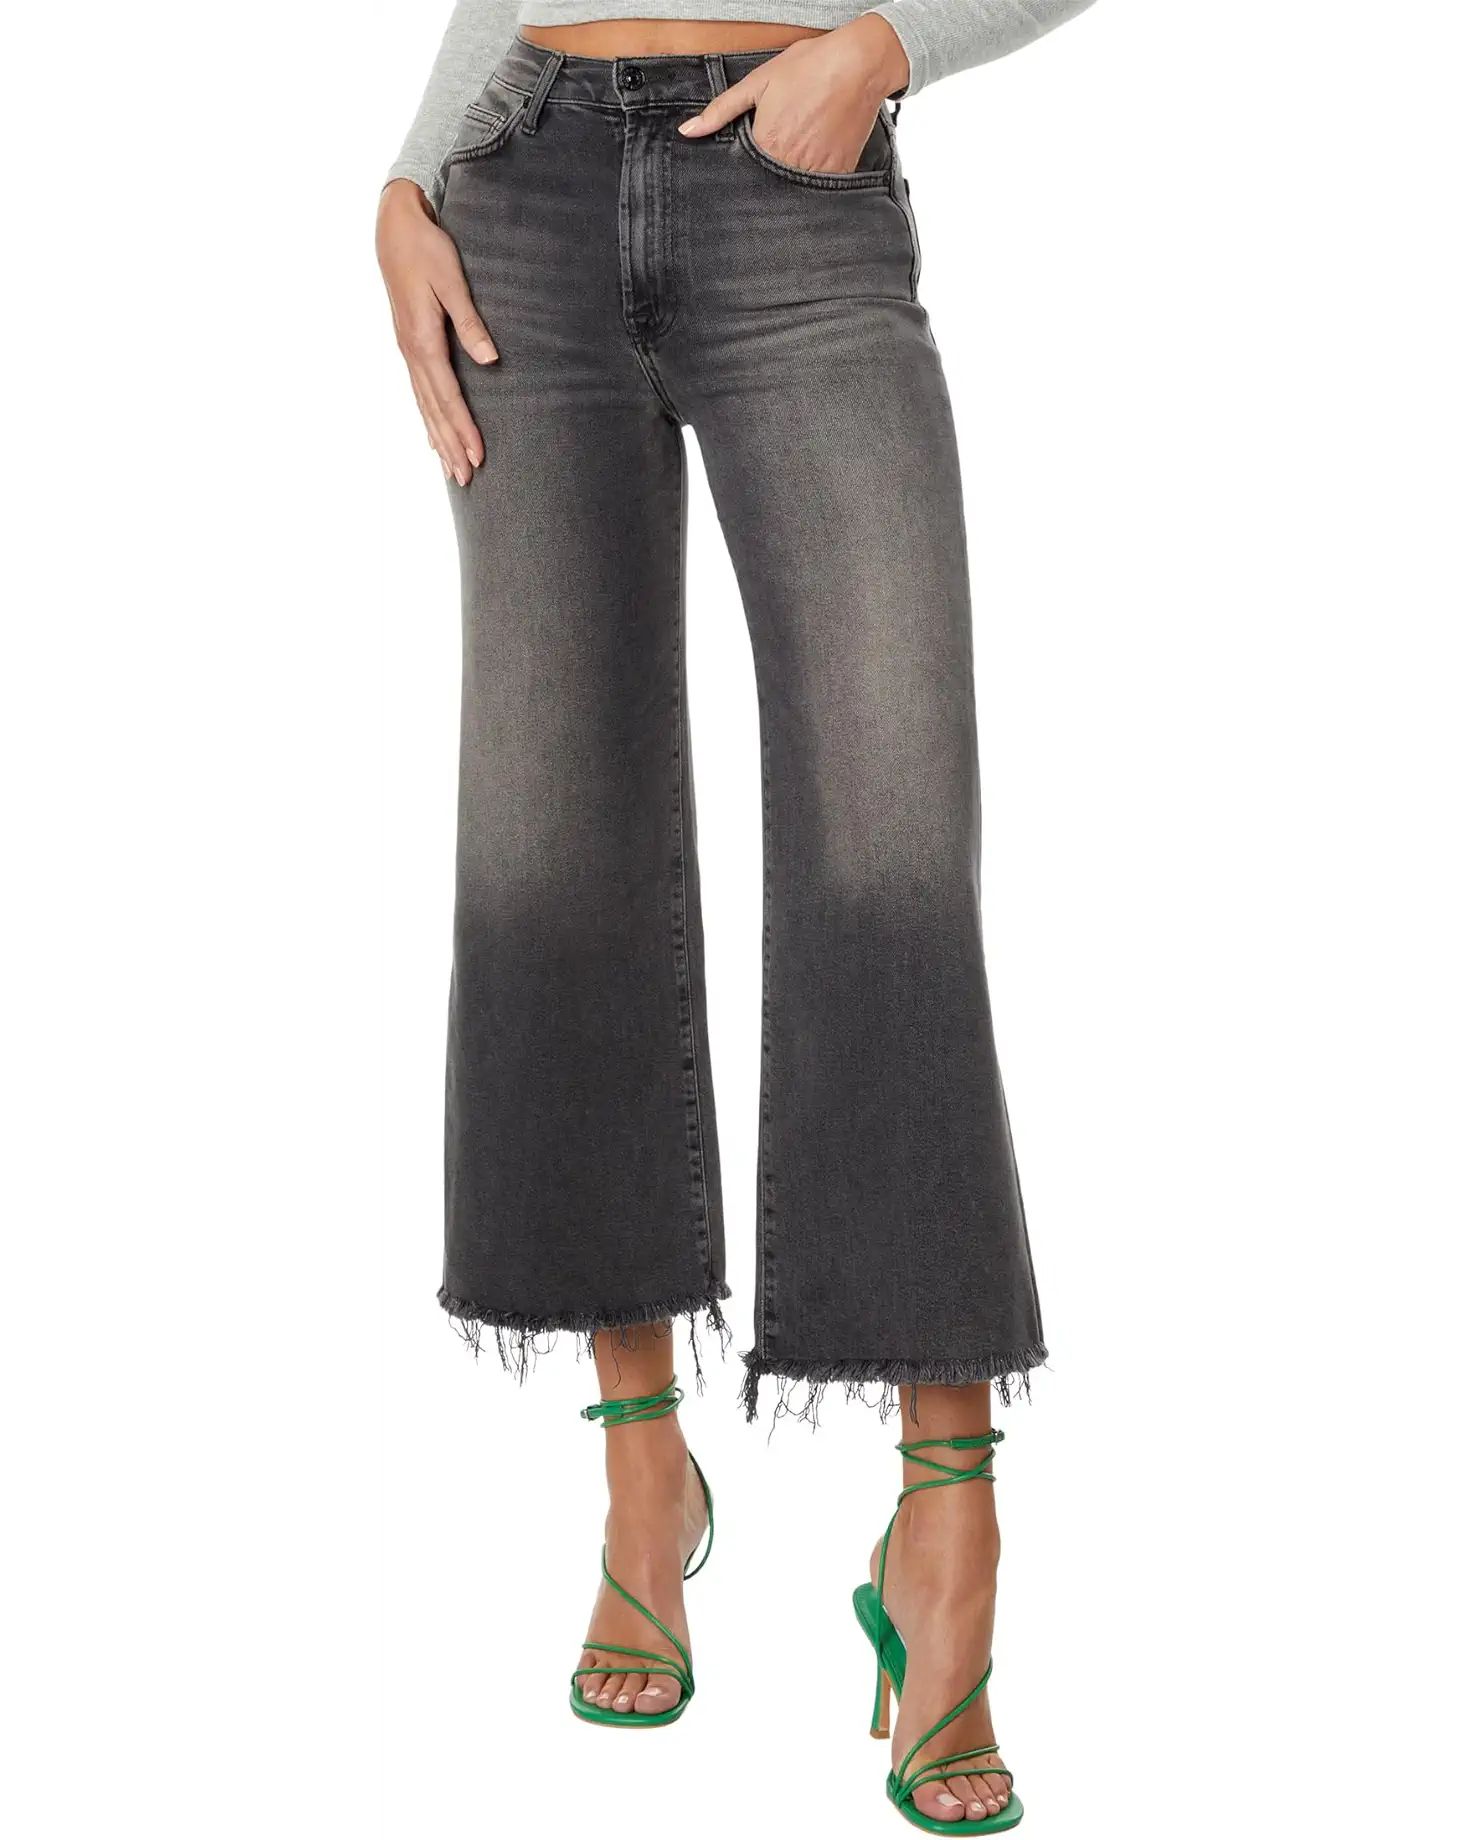 7 For All Mankind Ultra High Rise Cropped Jo in Courage | Zappos